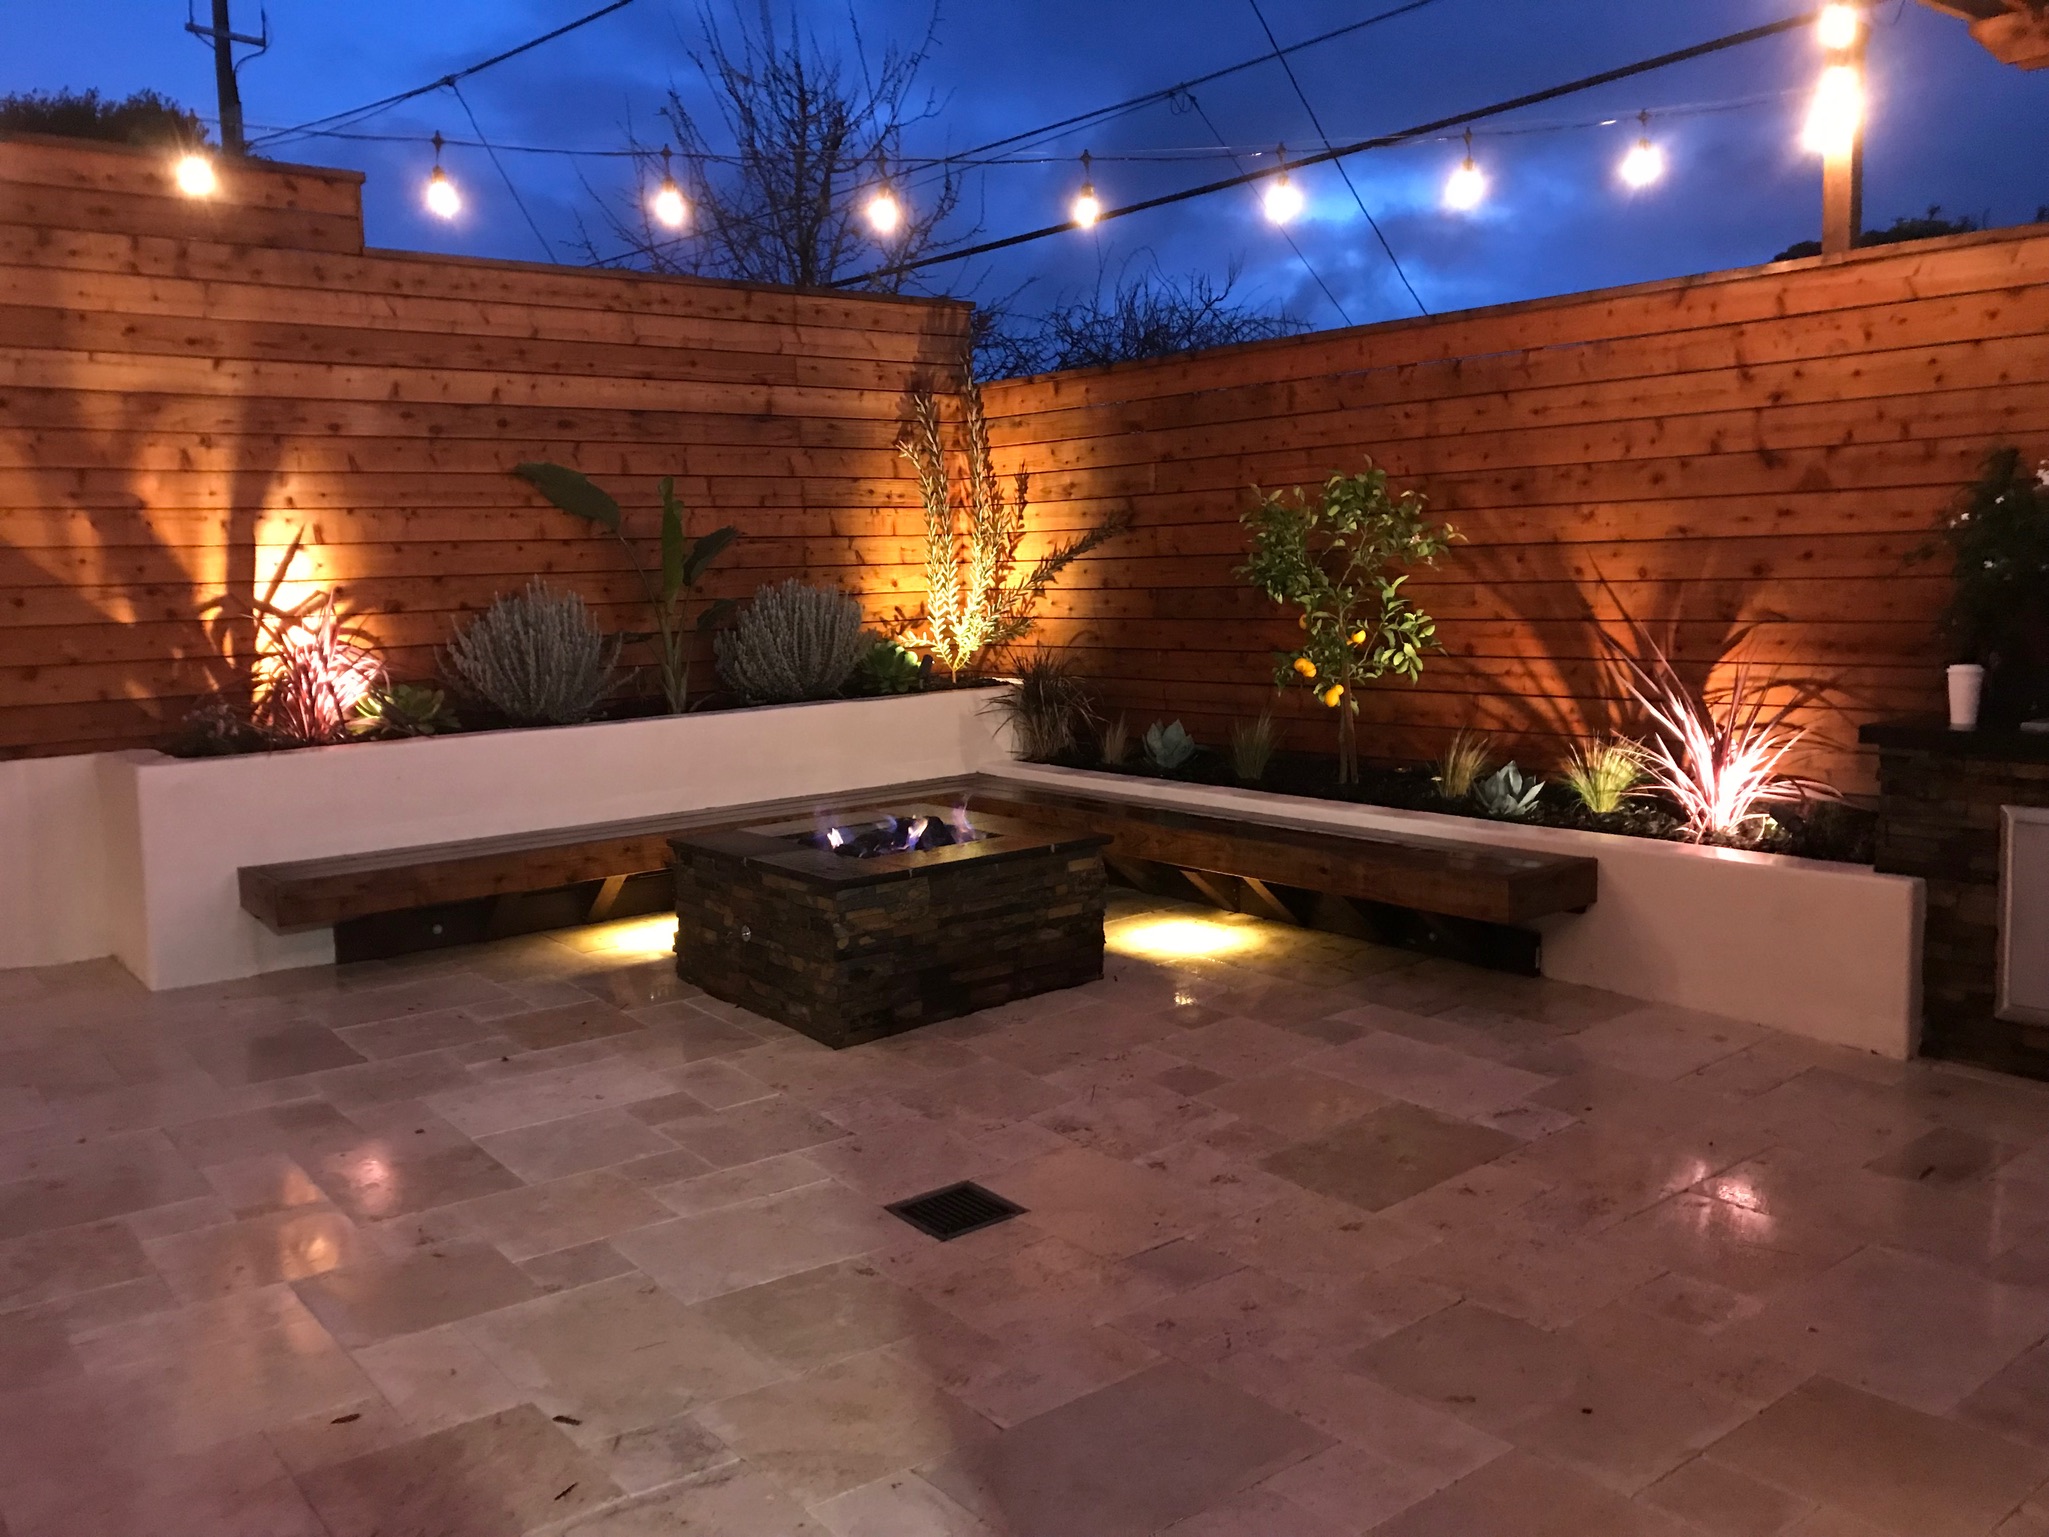 Fire pit in foreground, raised planters in back and right side with L-shaped redwood seating. Redwood fence in back of planters and travertine pavers on ground. Stringer lights above.